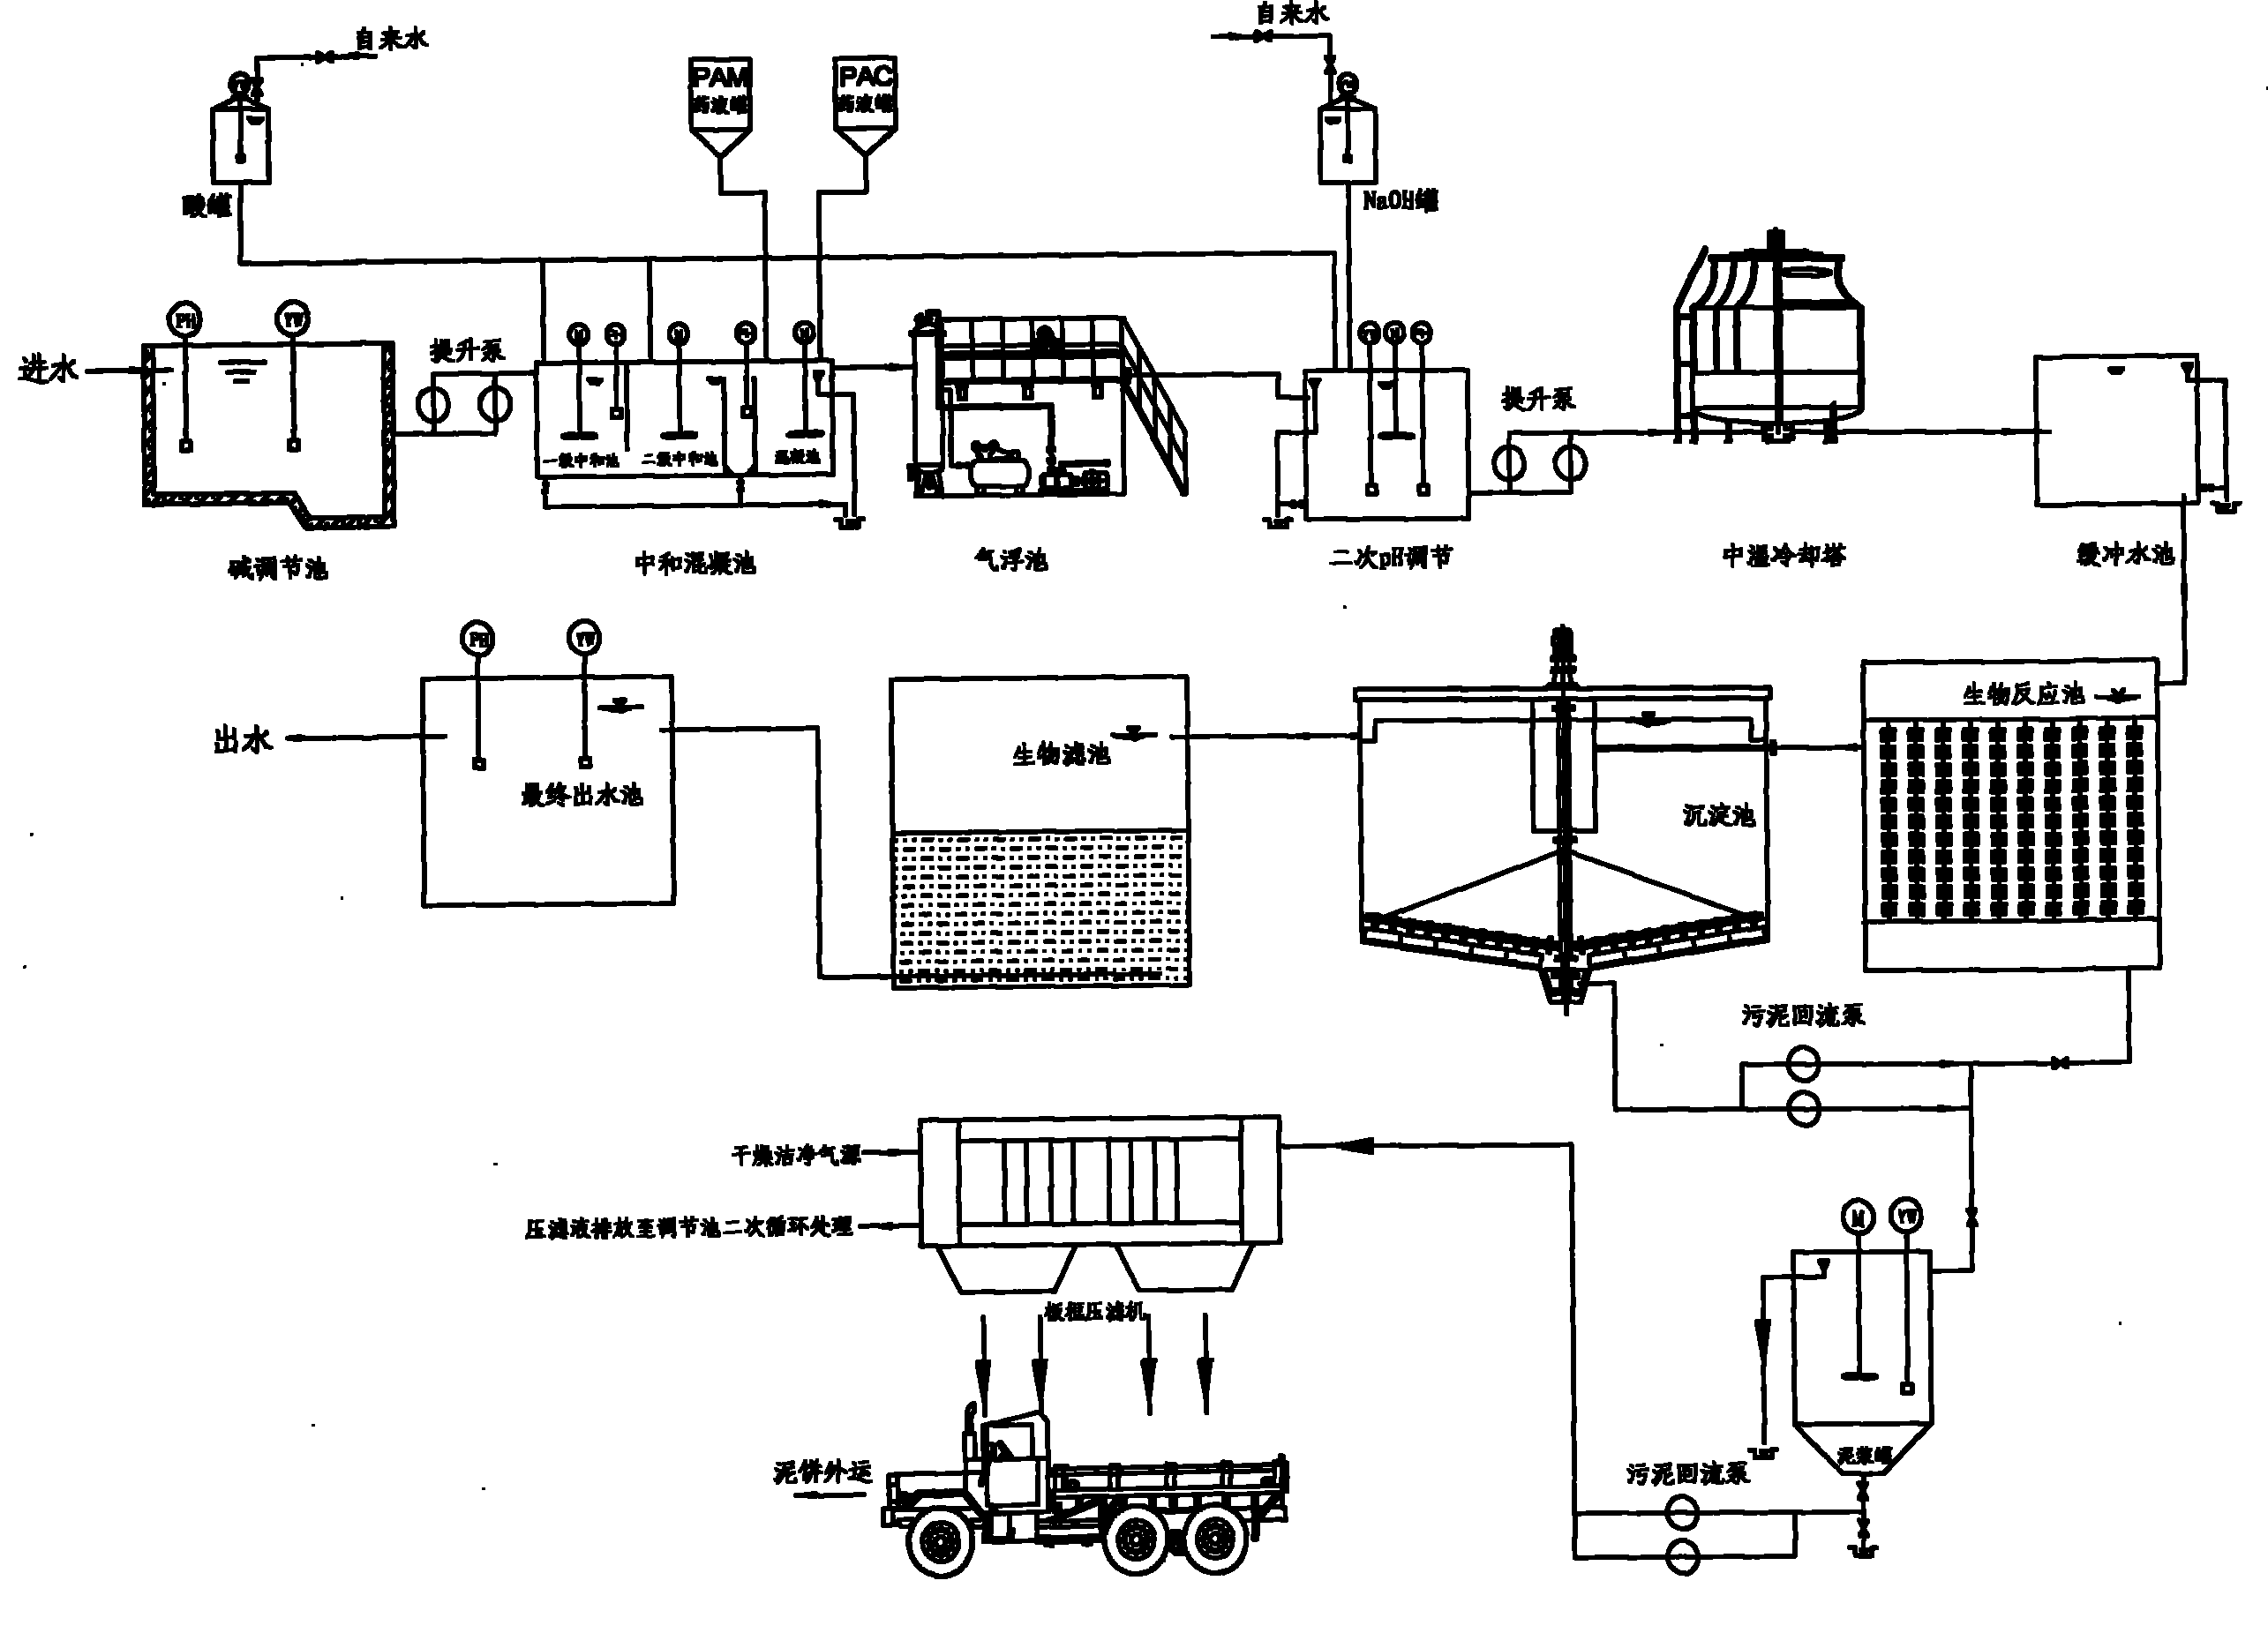 Apparatus for treating oil-containing alkaline waste water